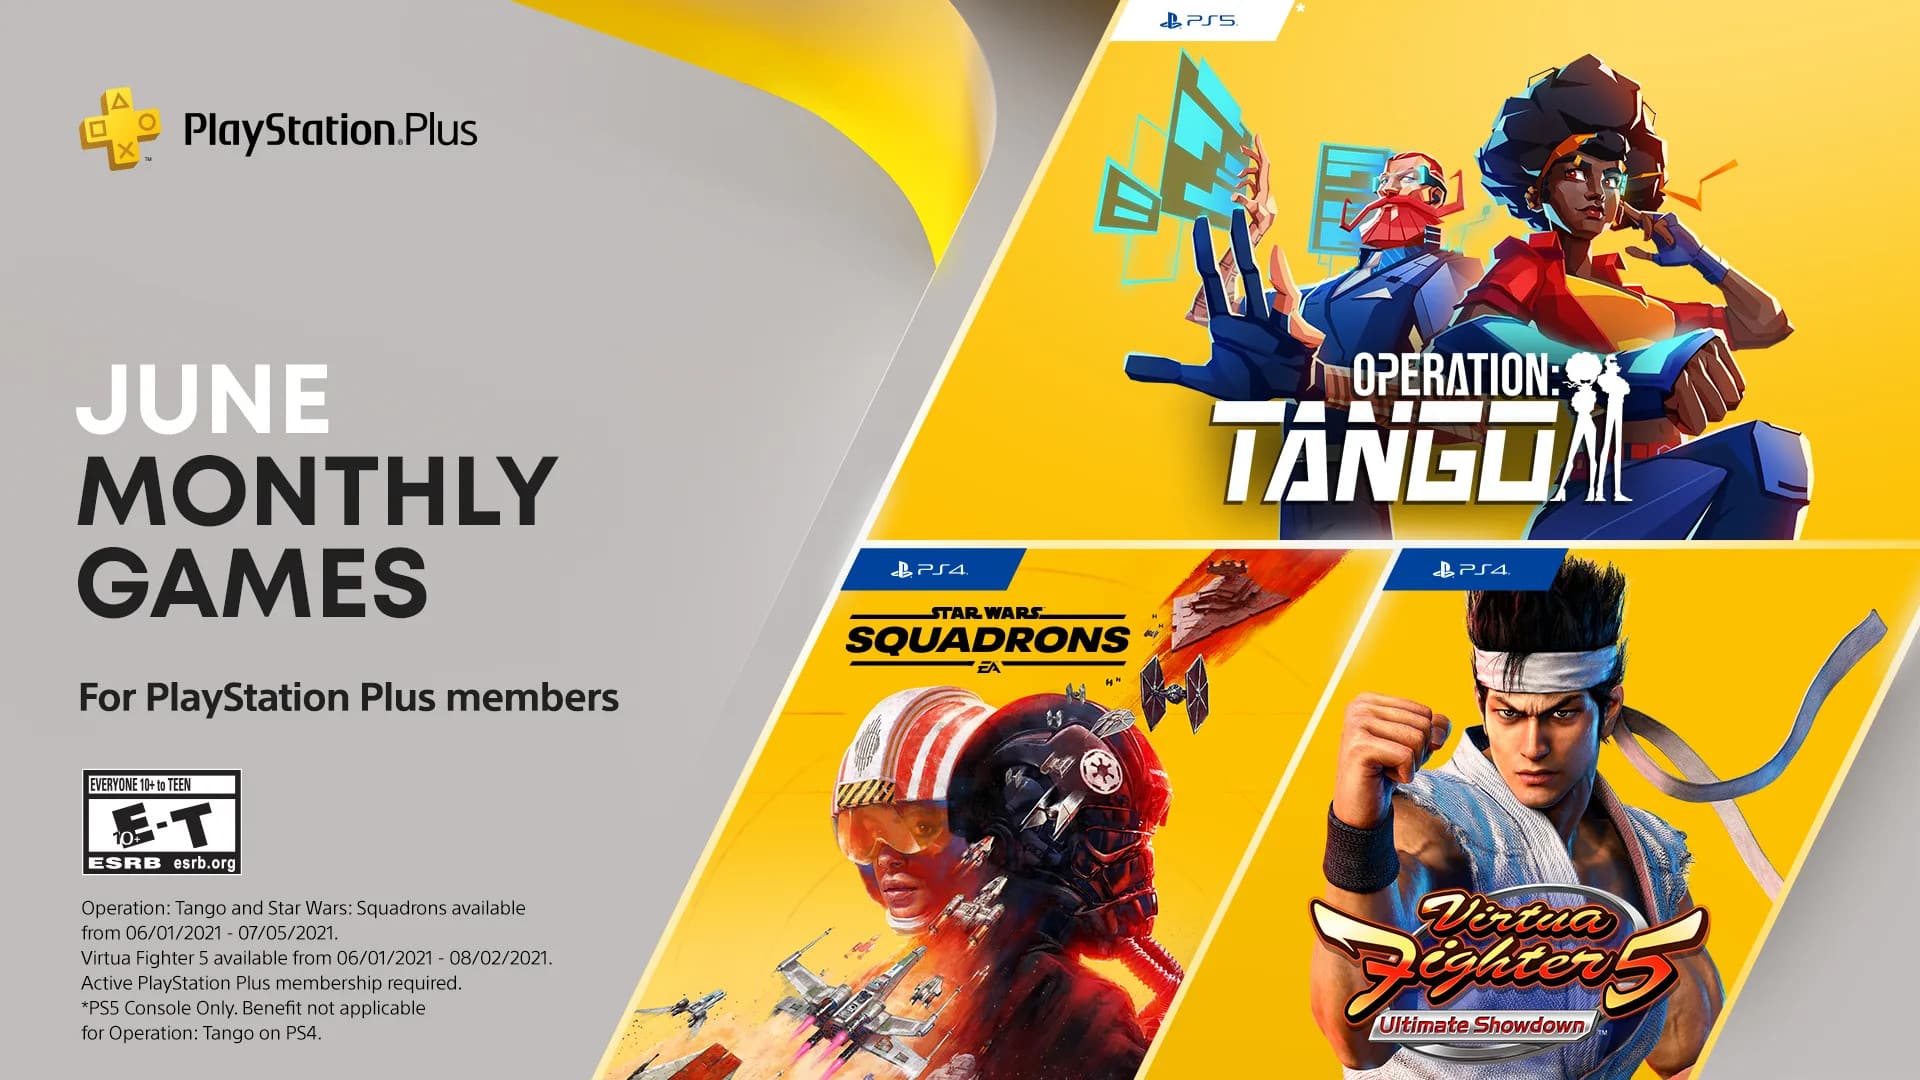 PlayStation Plus Games for June 2021